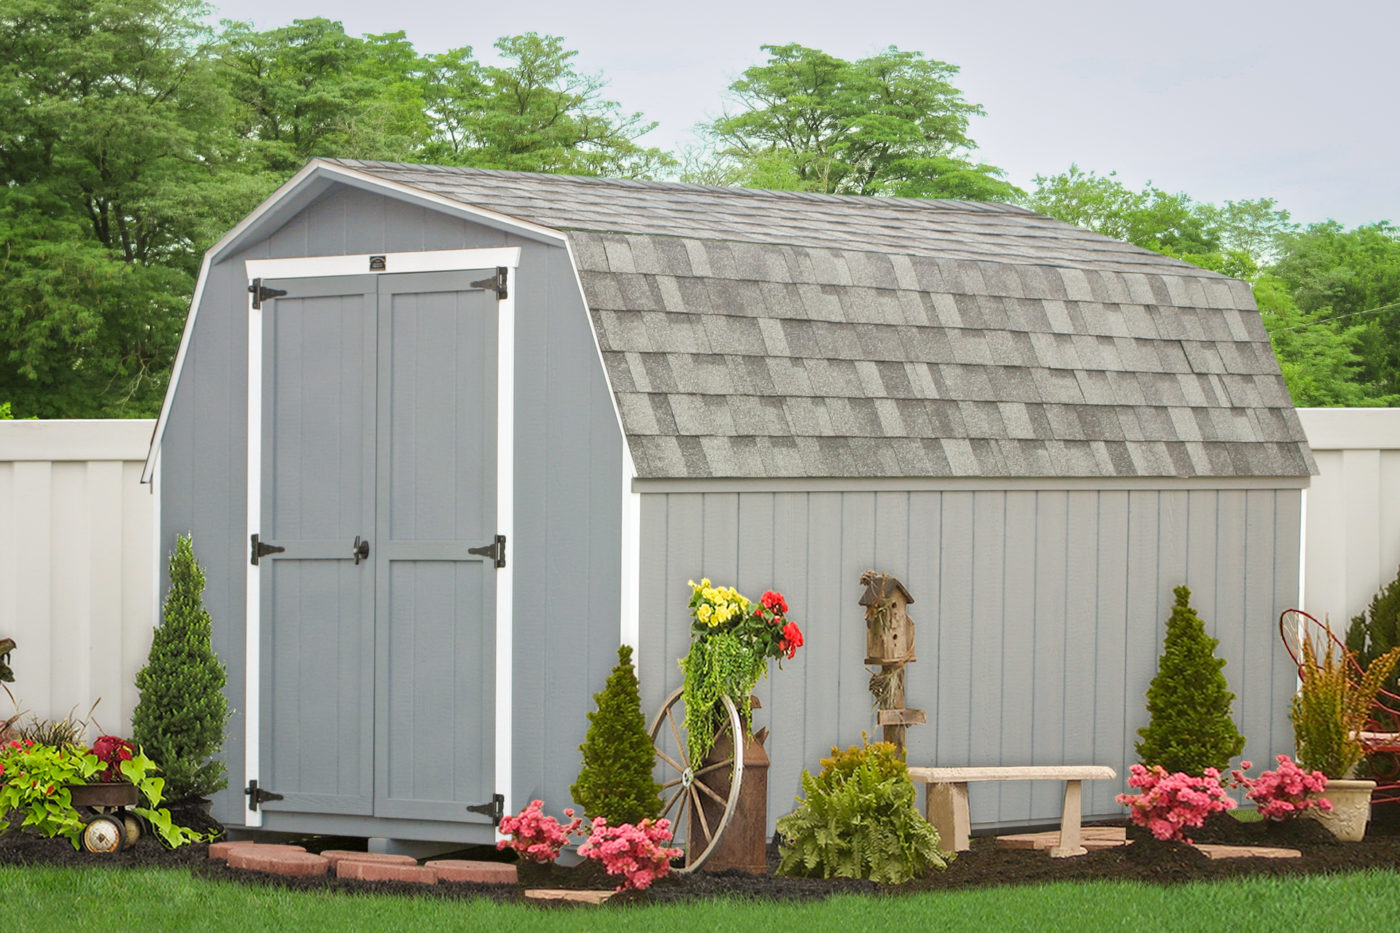 A minibarn shed from Sheds Unlimited